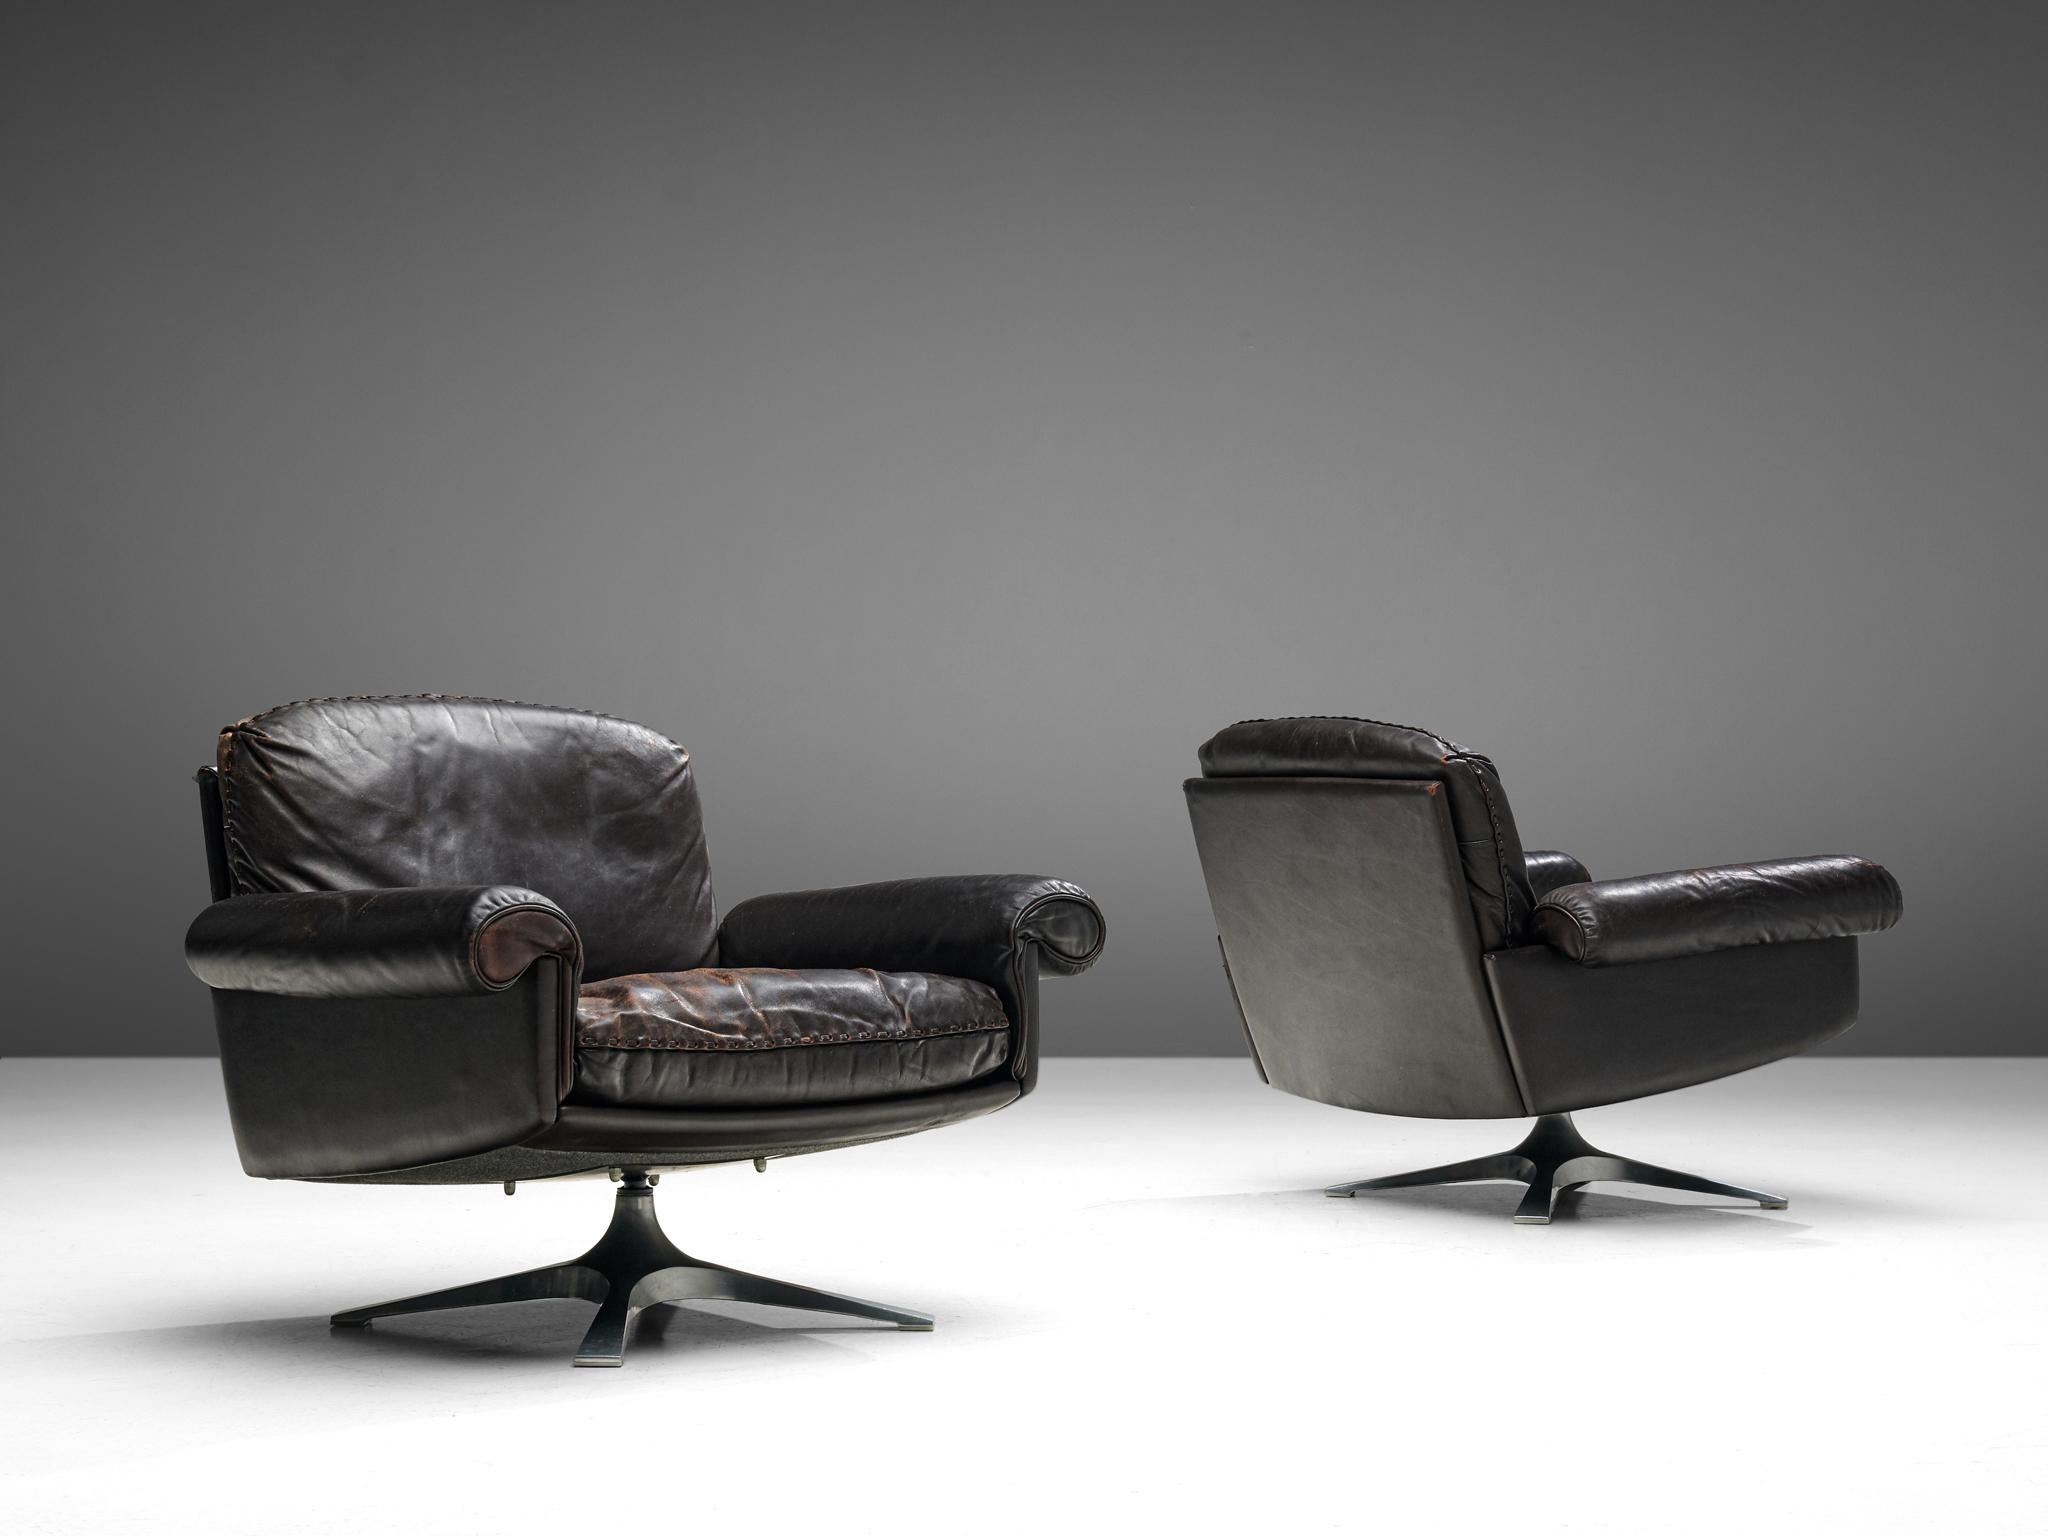 De Sede, pair of DS31 lounge chairs, leather and metal, Switzerland, 1970s

Highly comfortable pair of DS31 swivel chairs in chocolate brown leather by De Sede. The design is simplistic, yet very modern. The tilted seat is wide with outstanding,